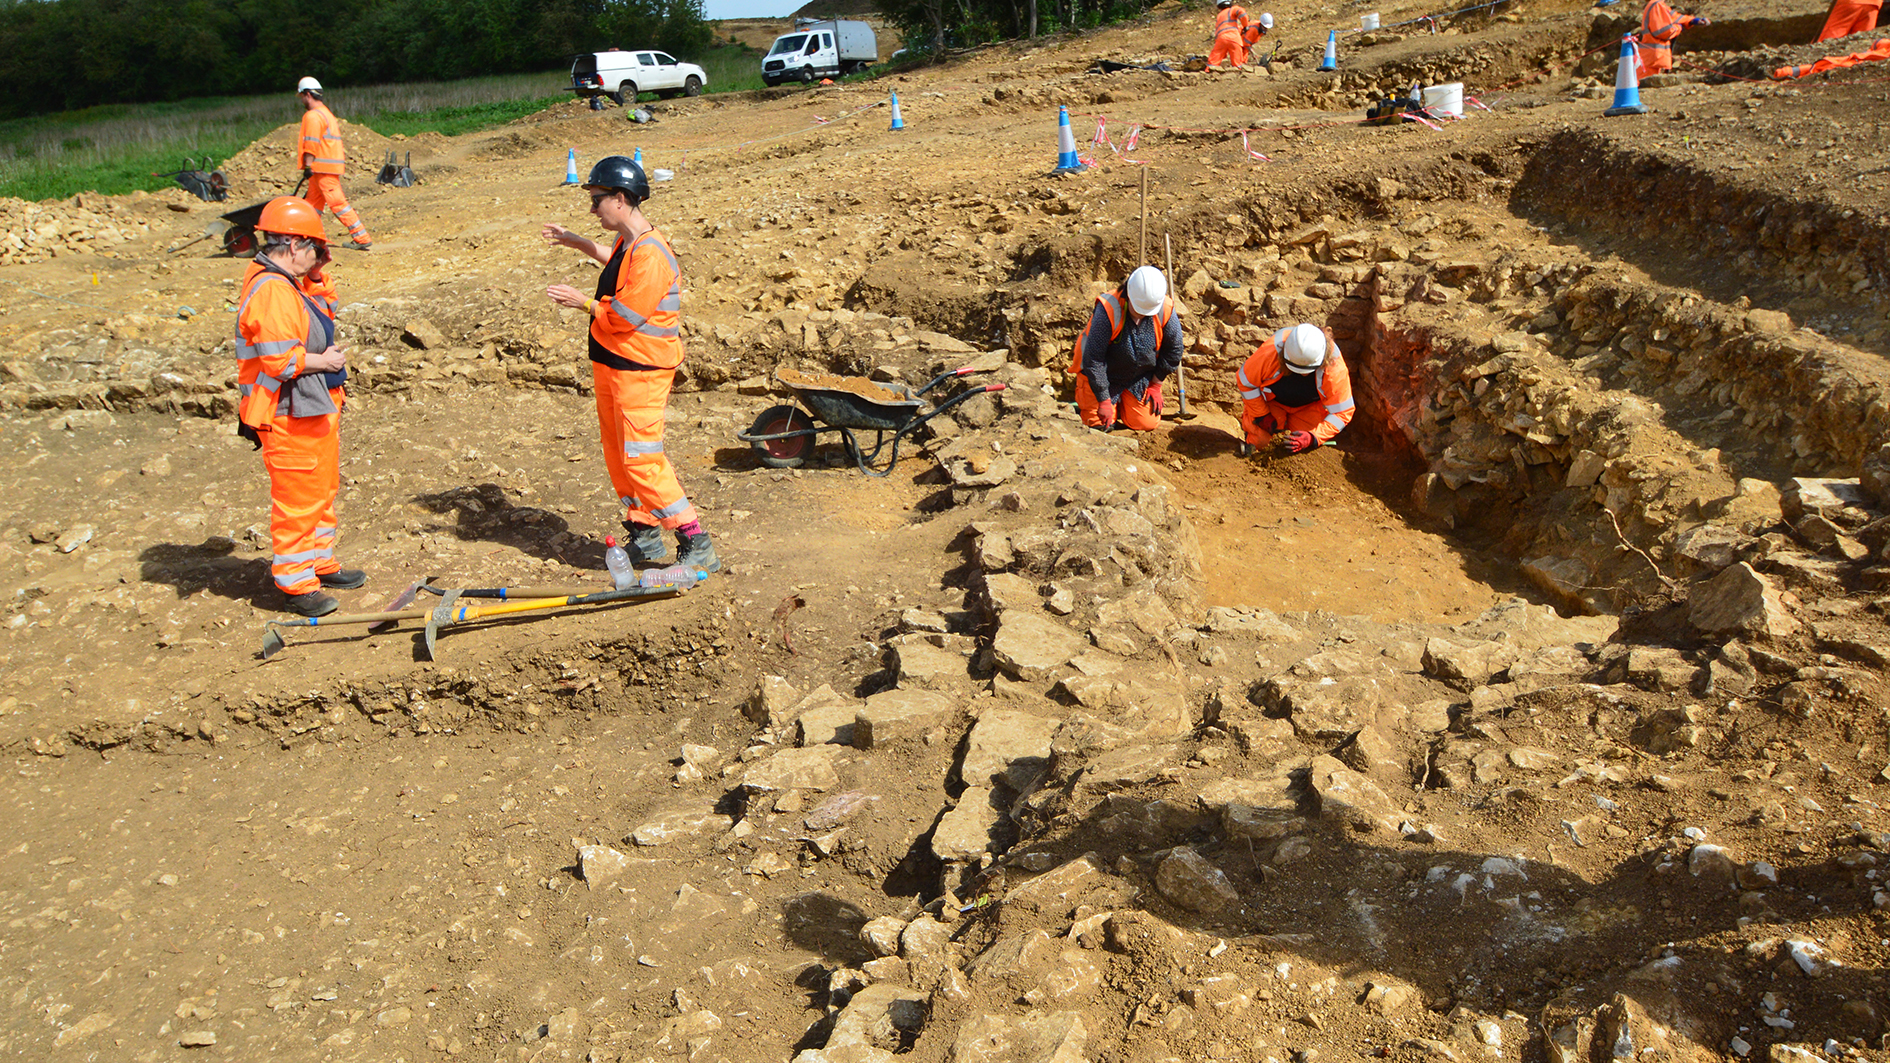 An image of Roman walls uncovered on the site of the upcoming new road near Grantham. A number of achaeologists in high vis are at work.